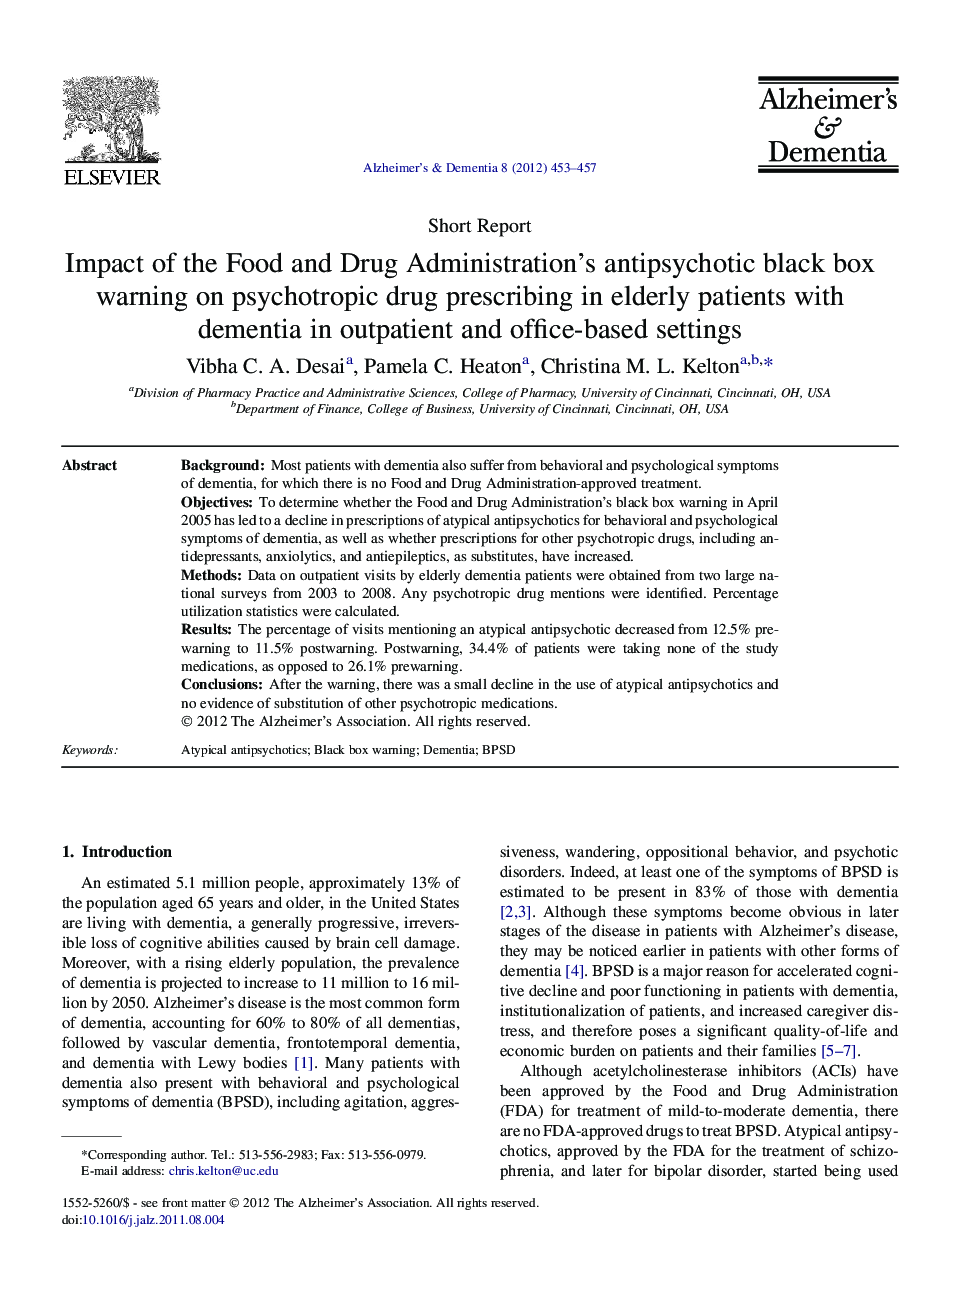 Short ReportImpact of the Food and Drug Administration's antipsychotic black box warning on psychotropic drug prescribing in elderly patients with dementia in outpatient and office-based settings